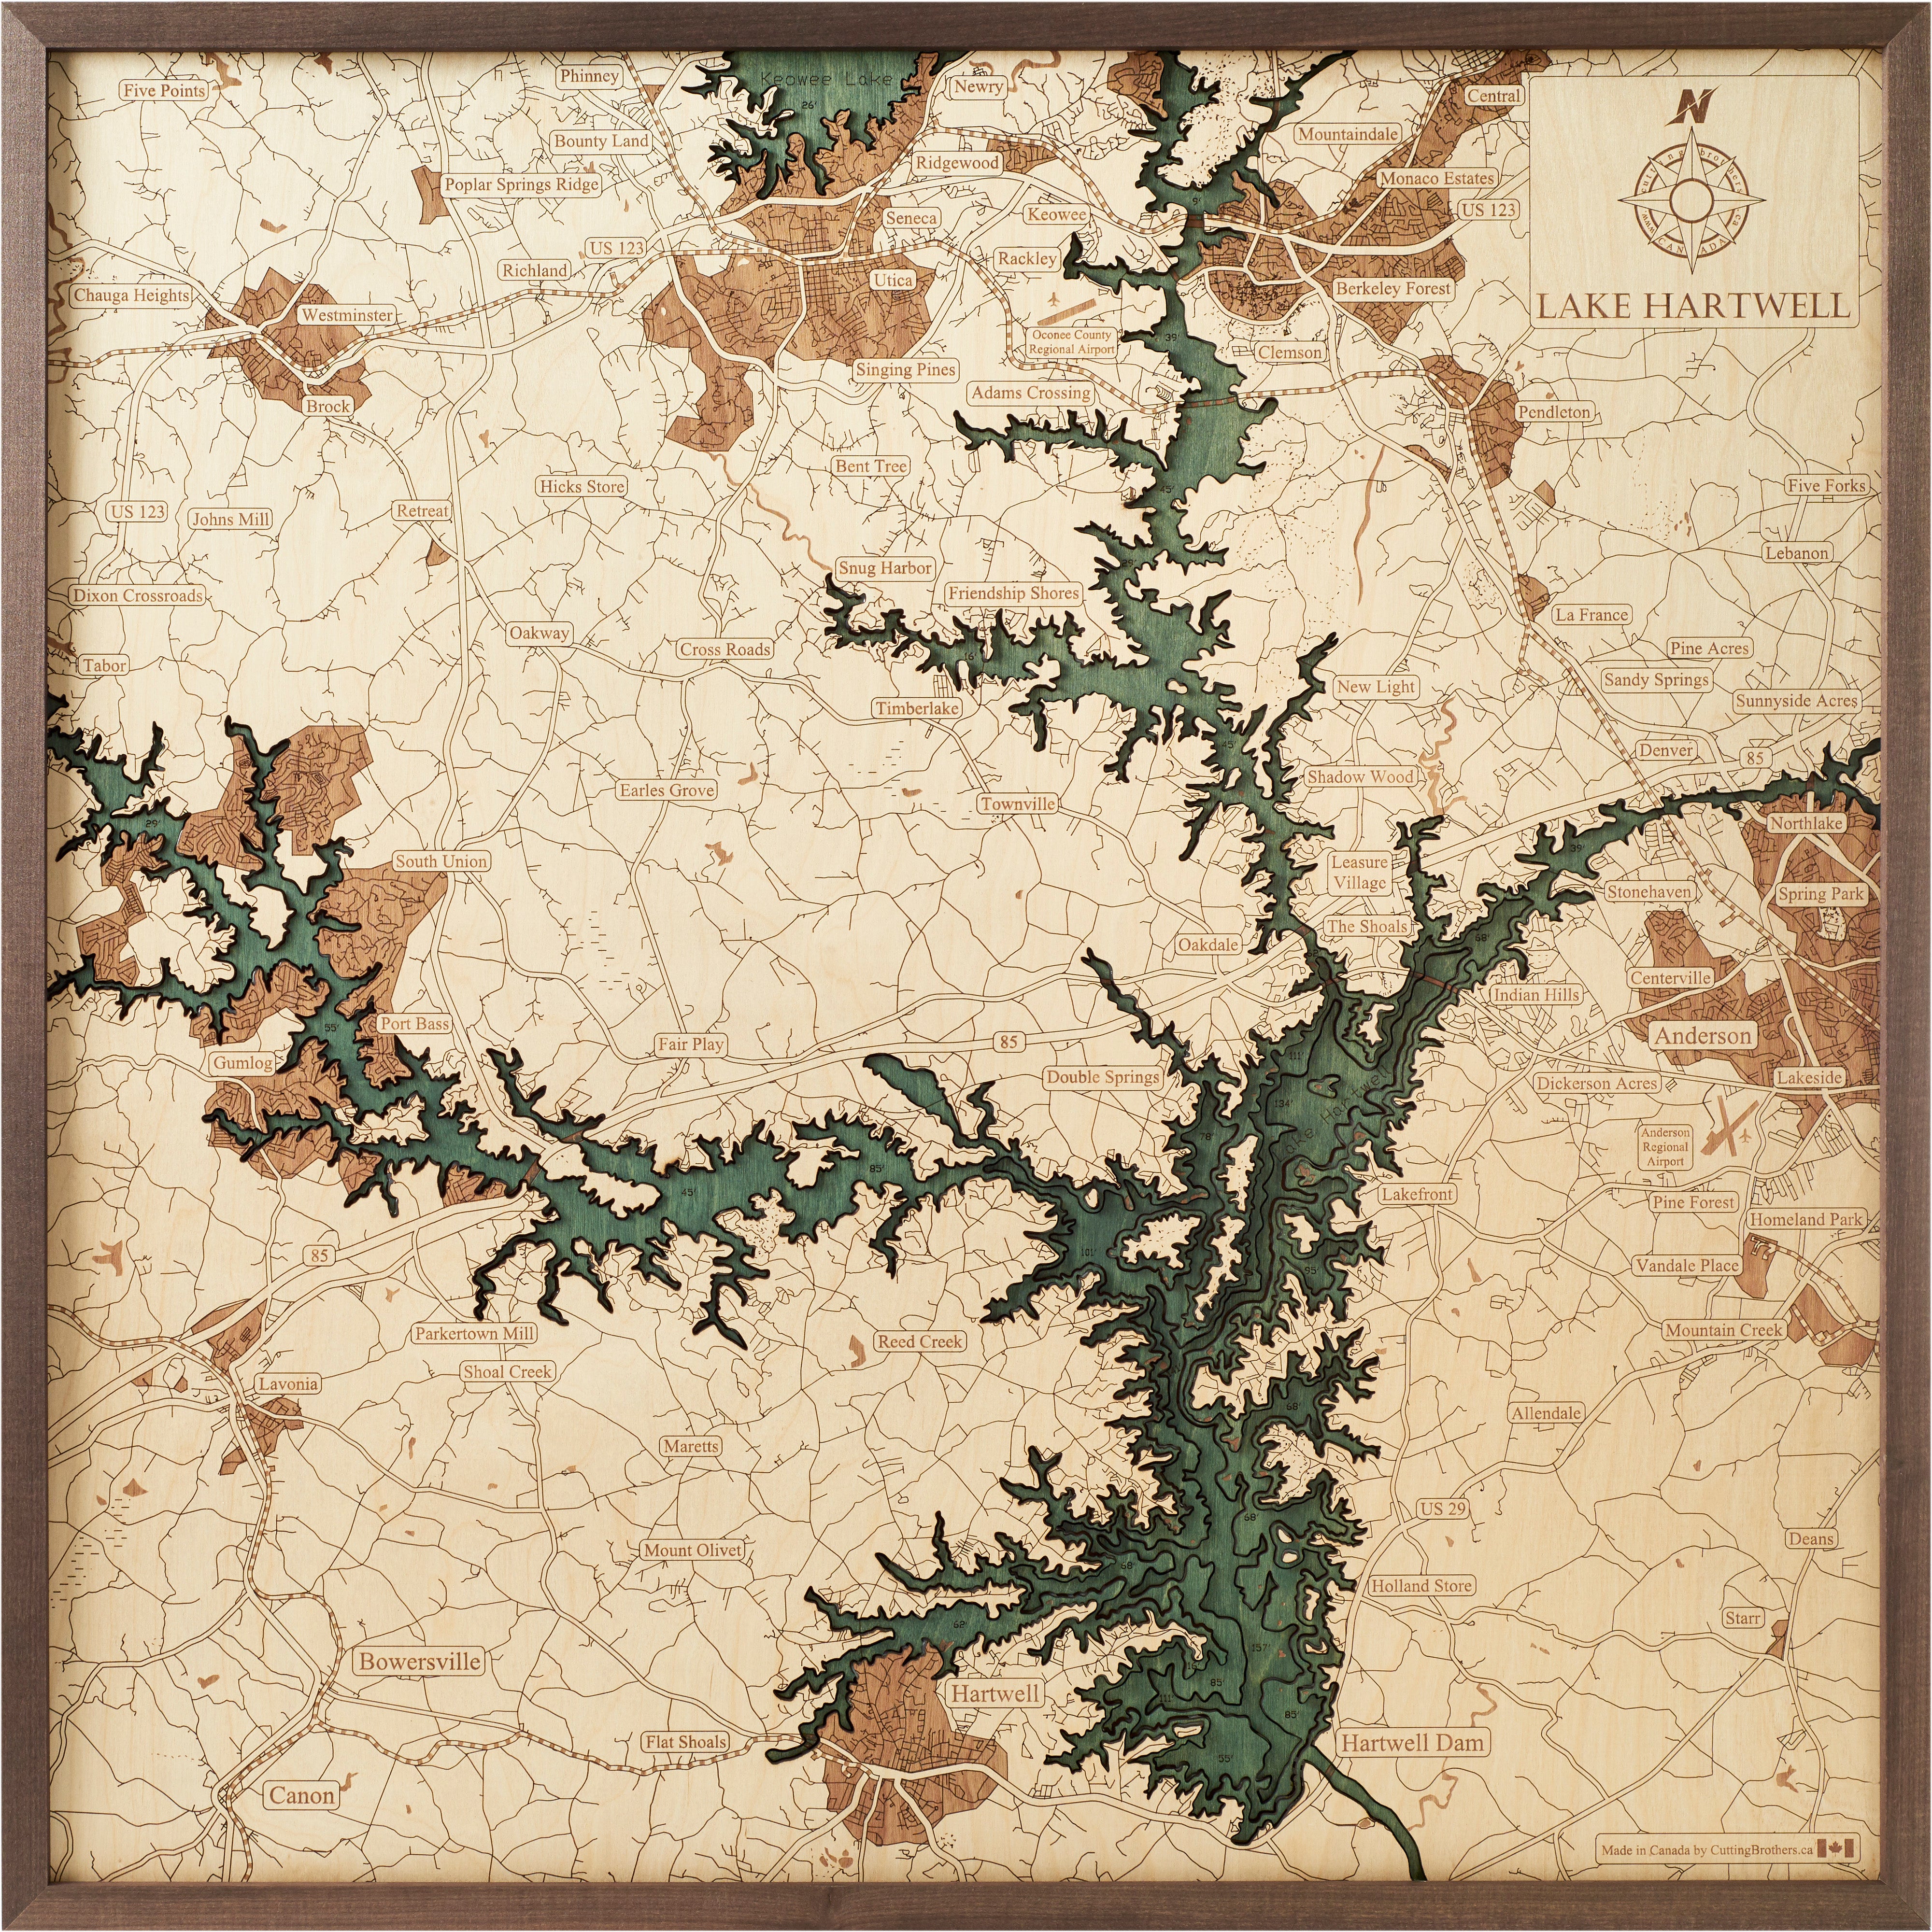 LAKE HARTWELL 3D WOODEN WALL MAP - Version L